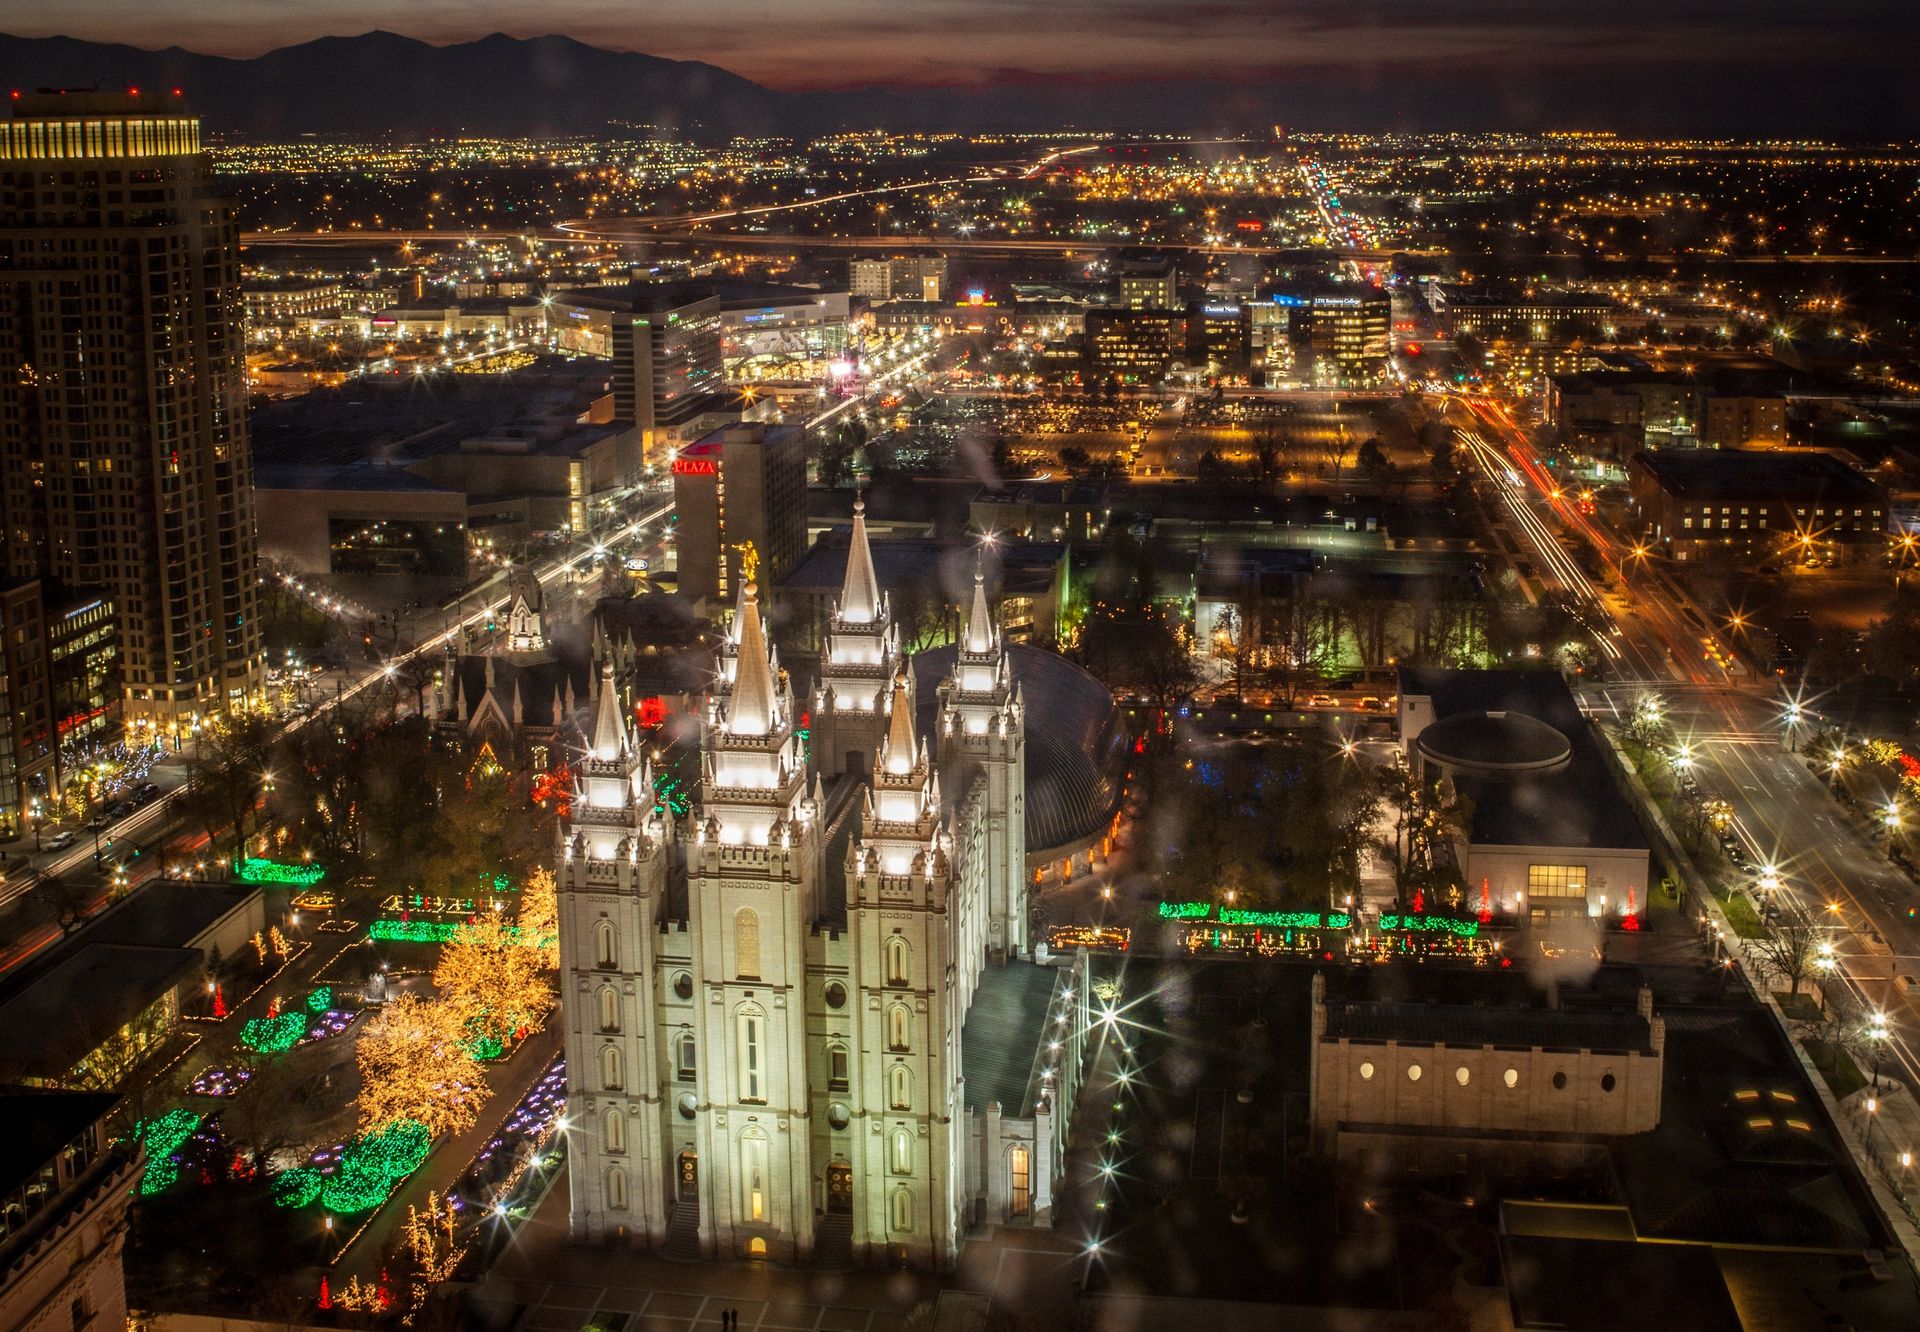 A bird’s-eye view of the Salt Lake Temple at Christmas.